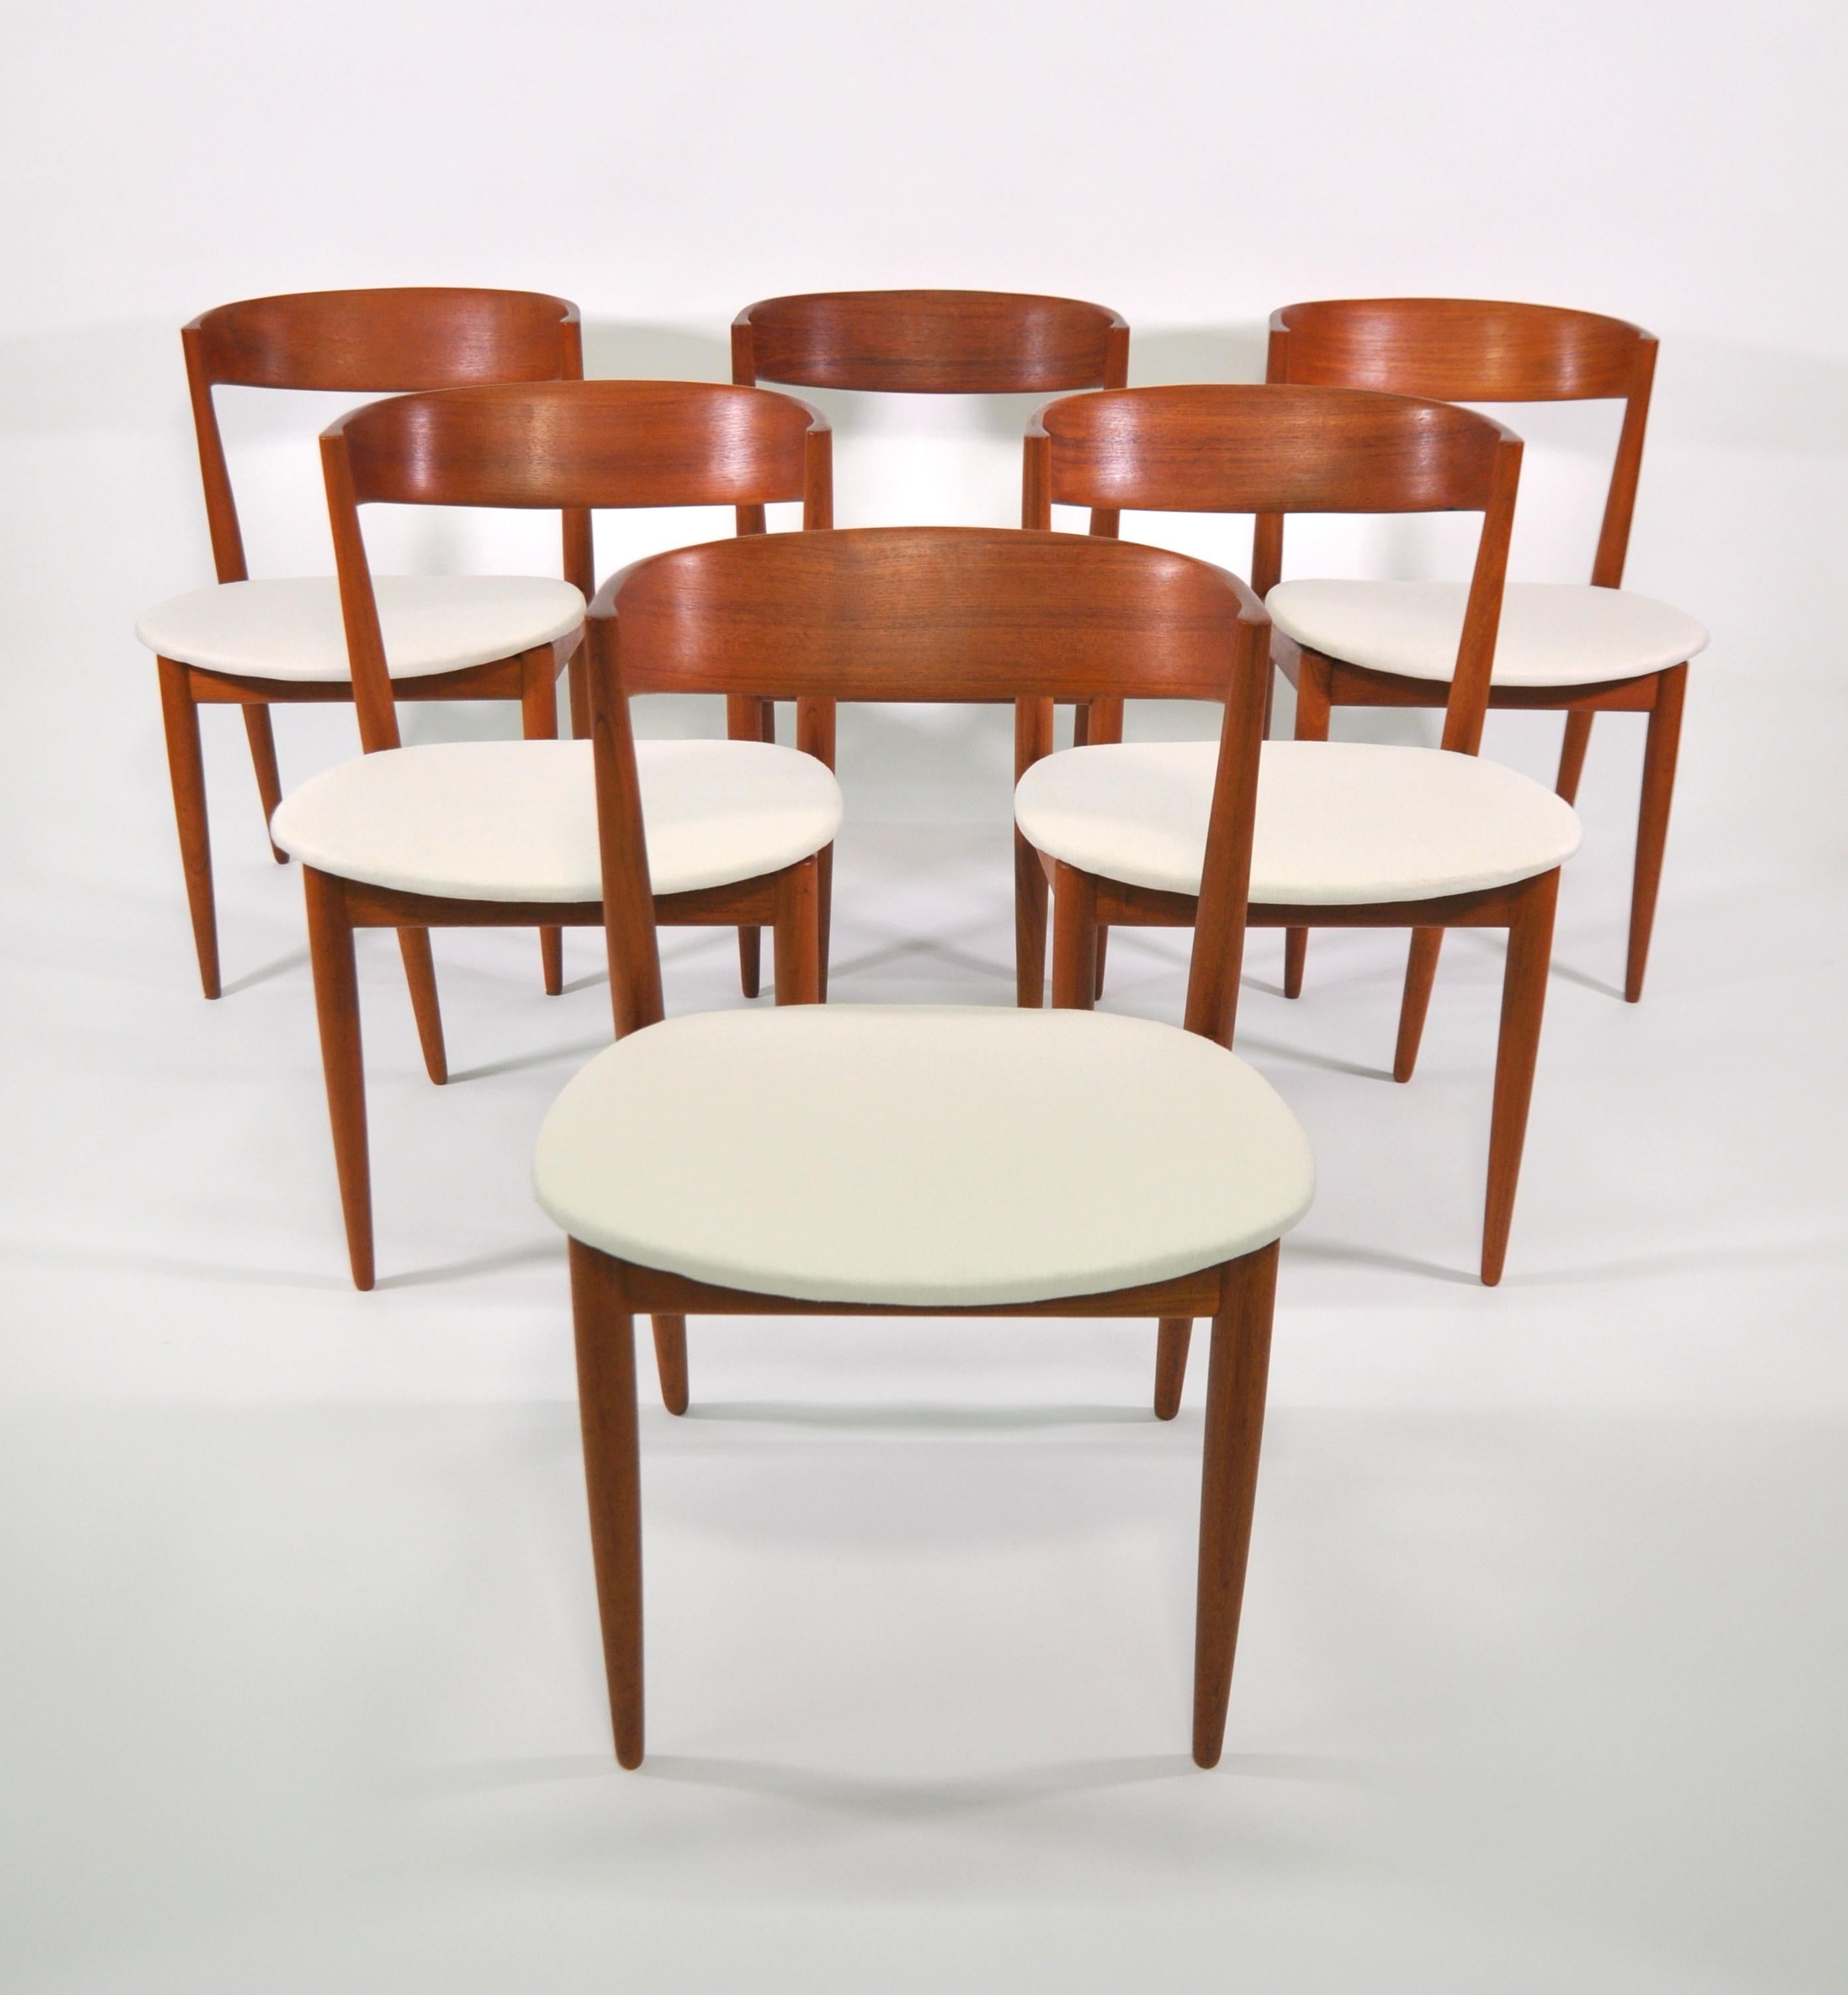 Very rare set of 6 vintage Danish Mid-Century Modern dining chairs, designed by Henry Walter Klein for Bramin Mobler (aka NA Jorgensens Mobelfabrik), dating from the early to mid-1960s. The teak frames feature floating seats that have been